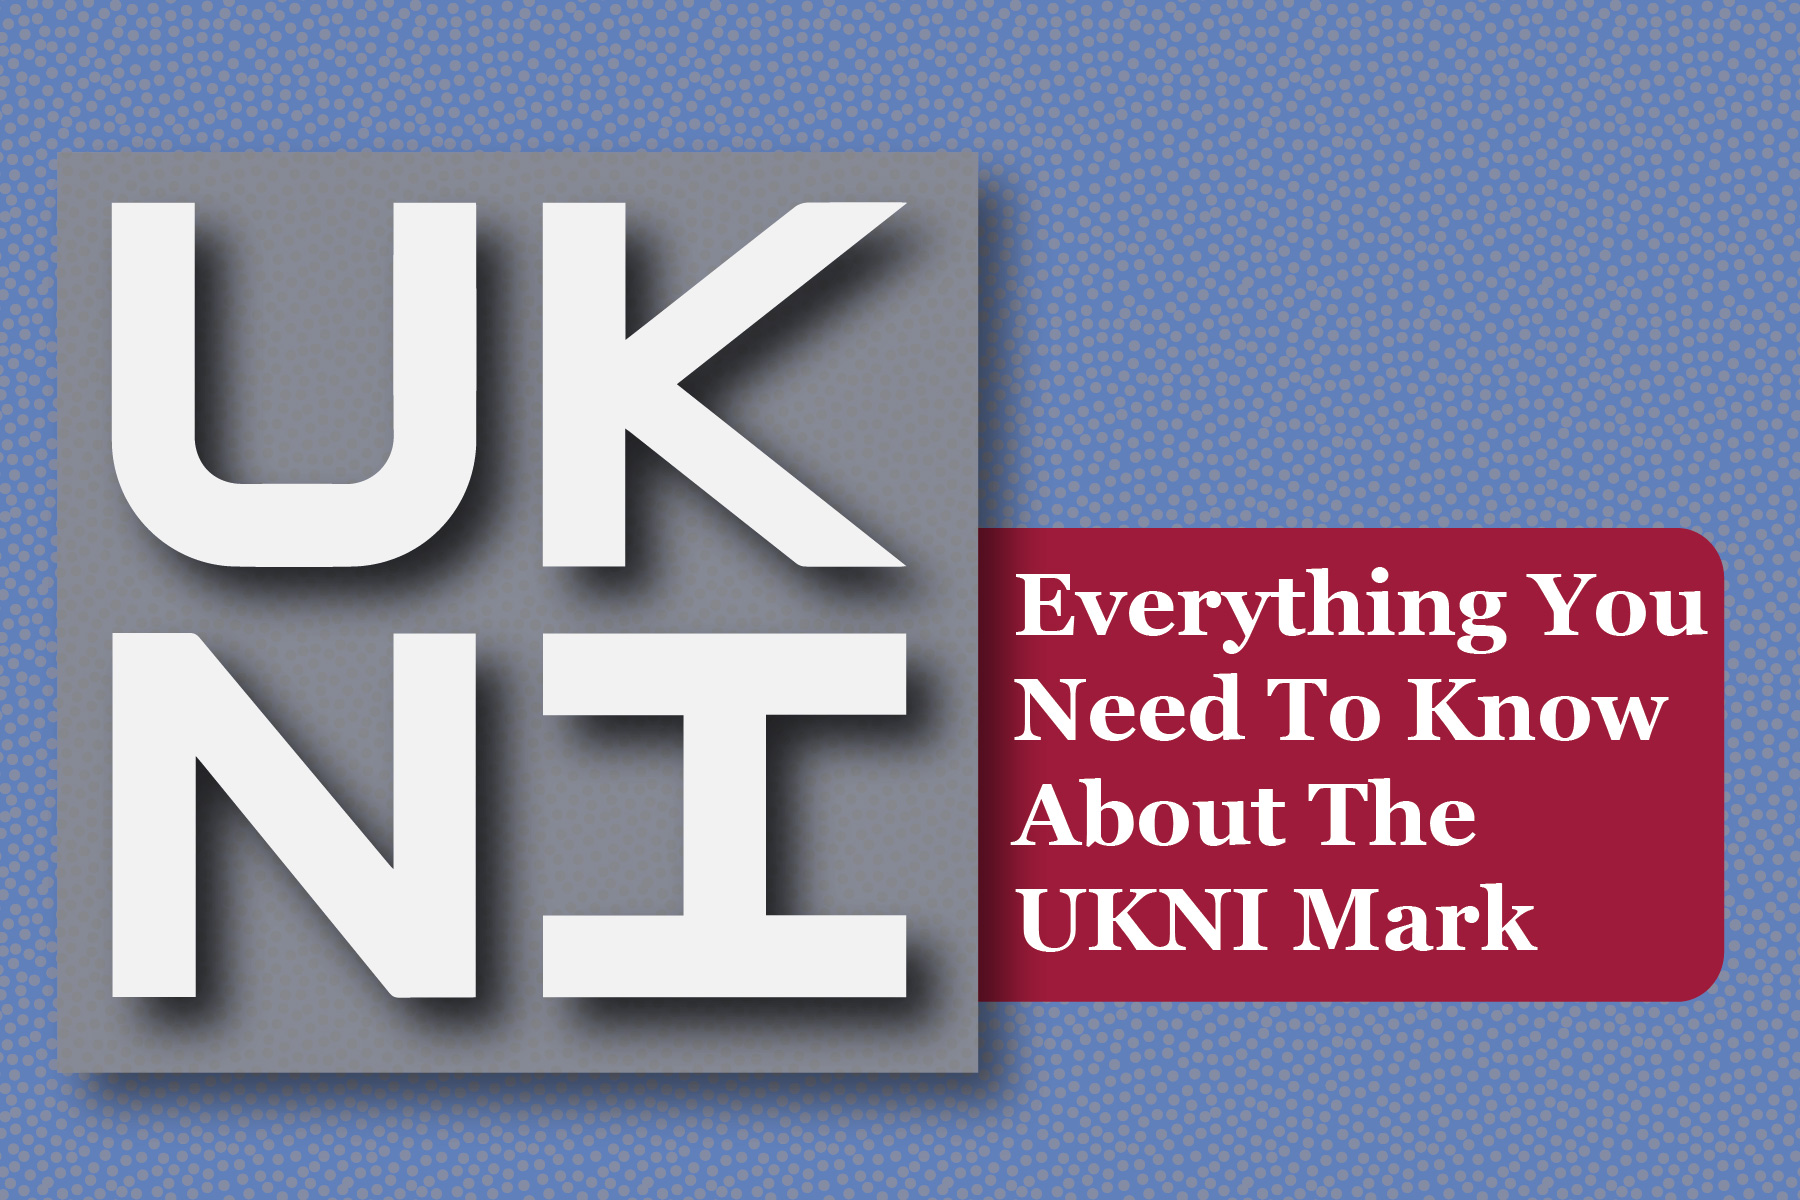 Everything You Need To Know About The UKNI Mark